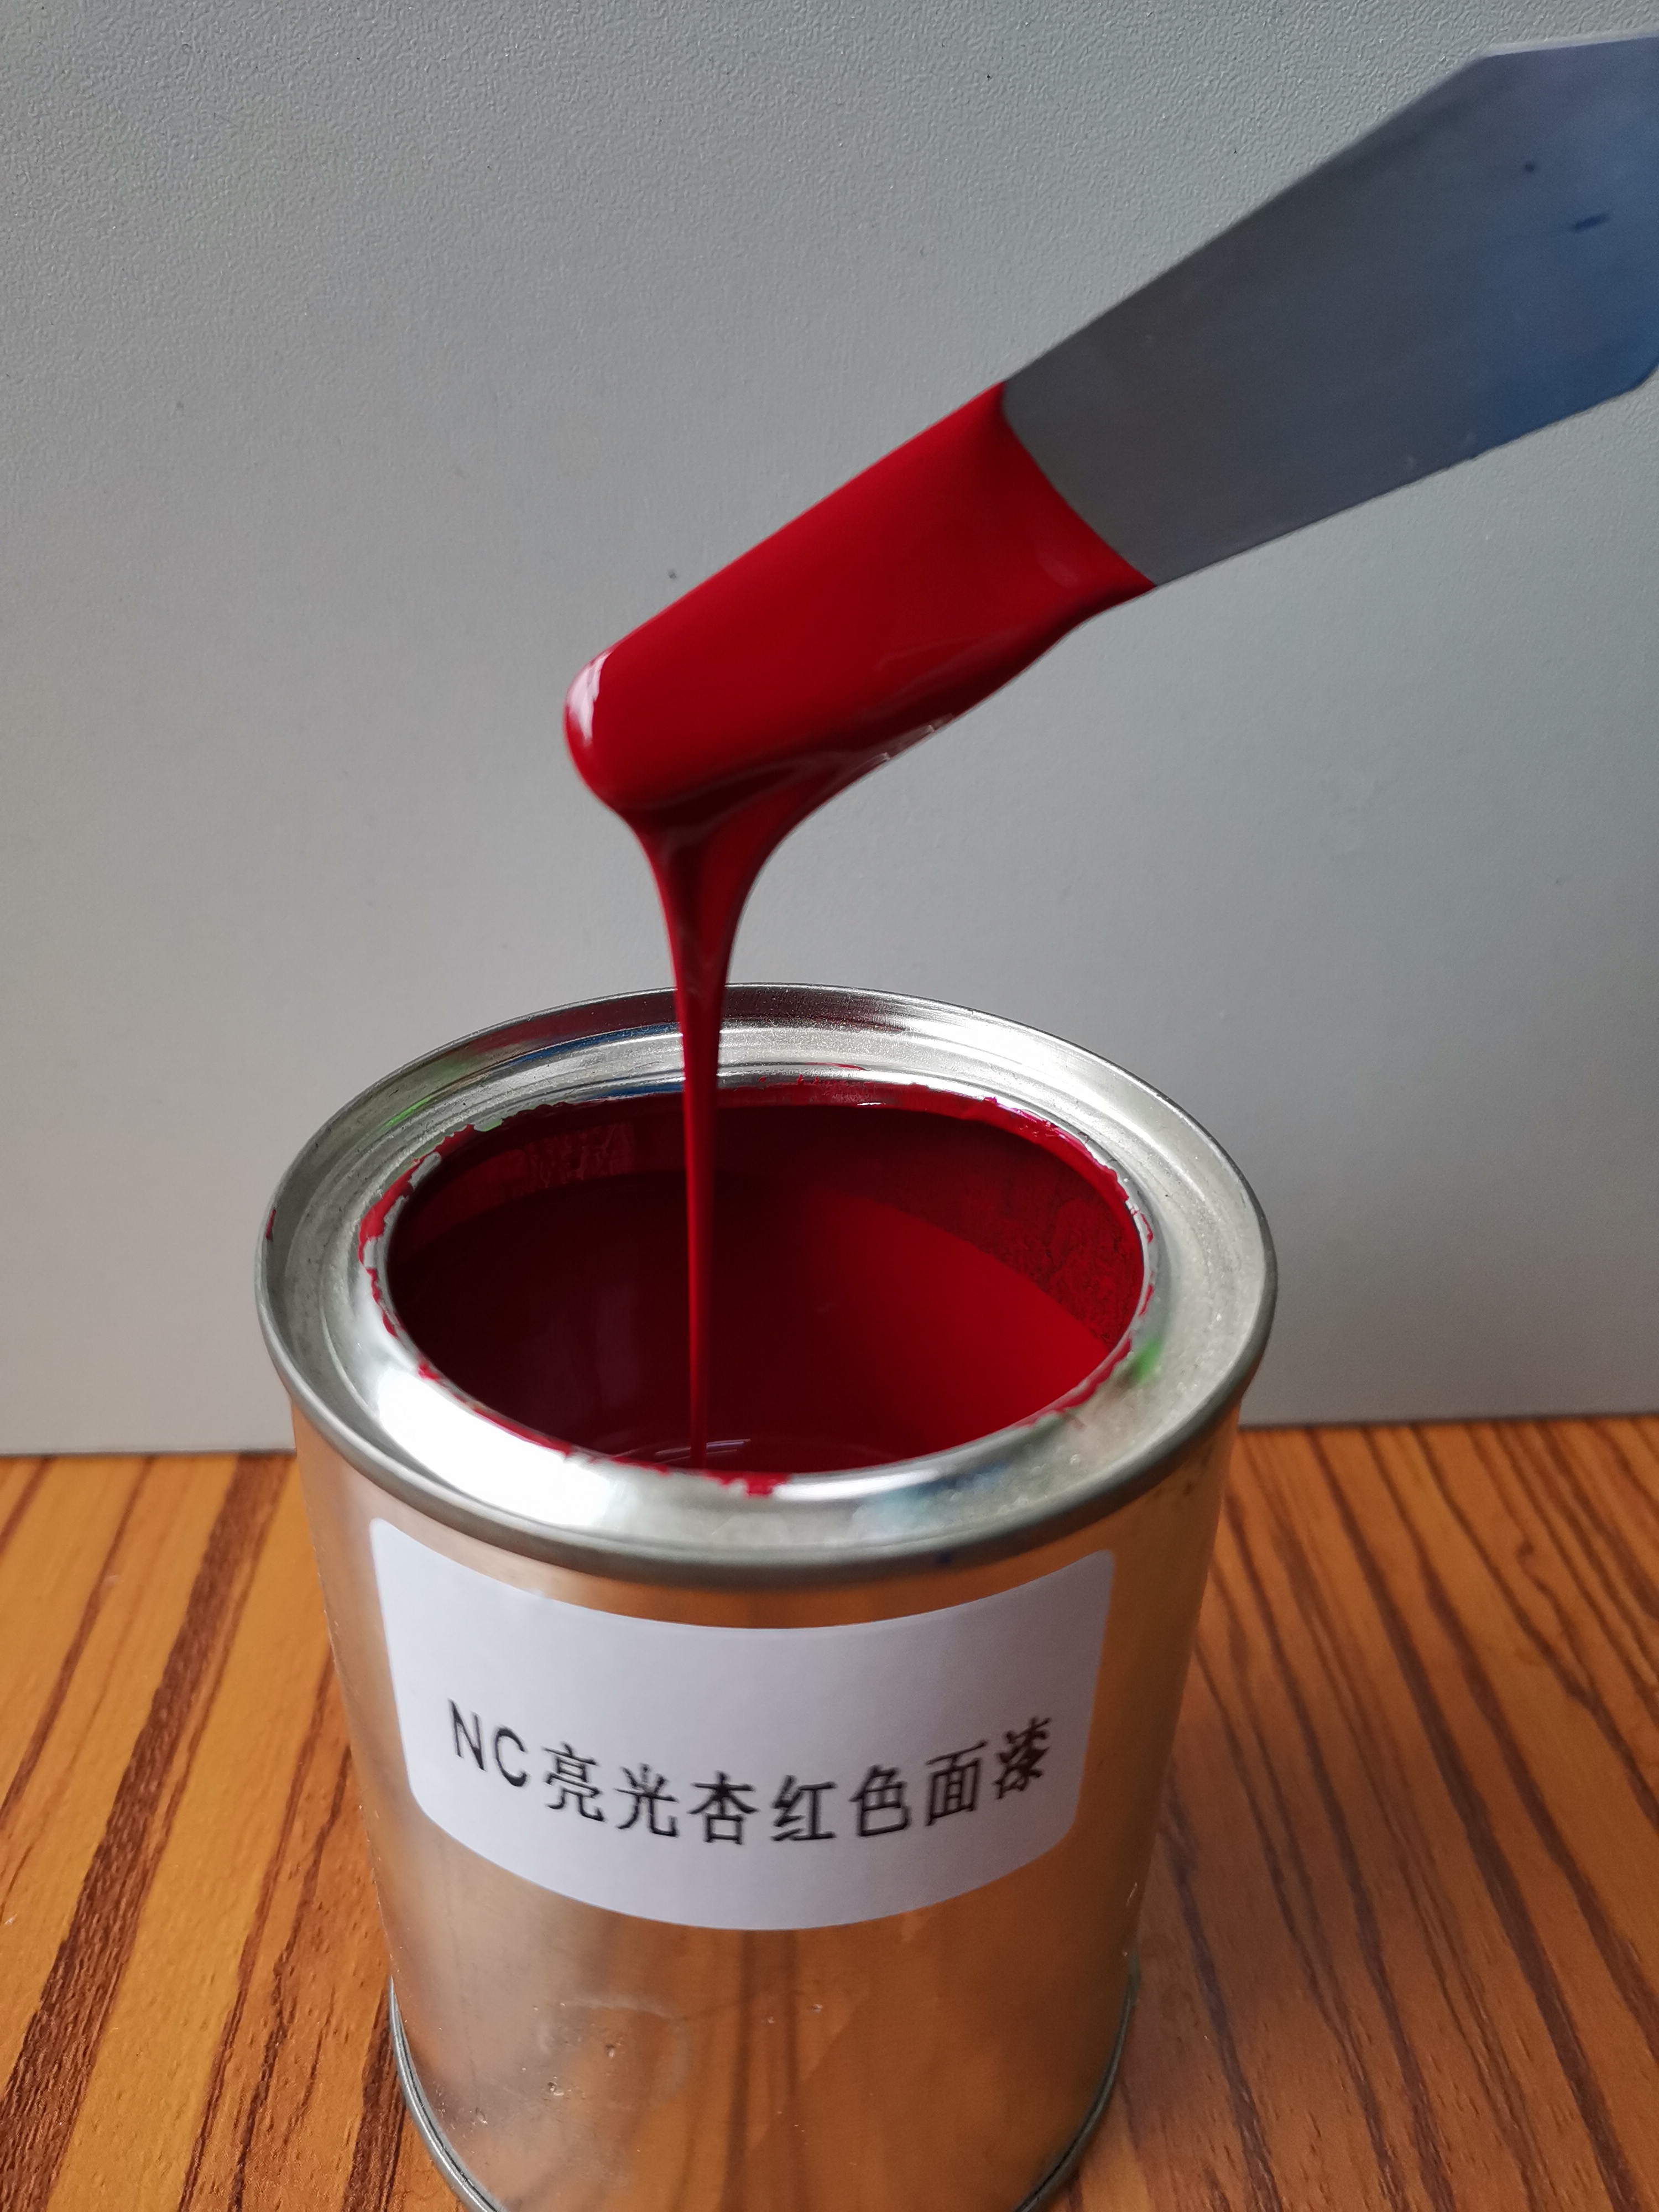 1K Excellent Adhesion Anti-Corrosion Car Refinish Paint